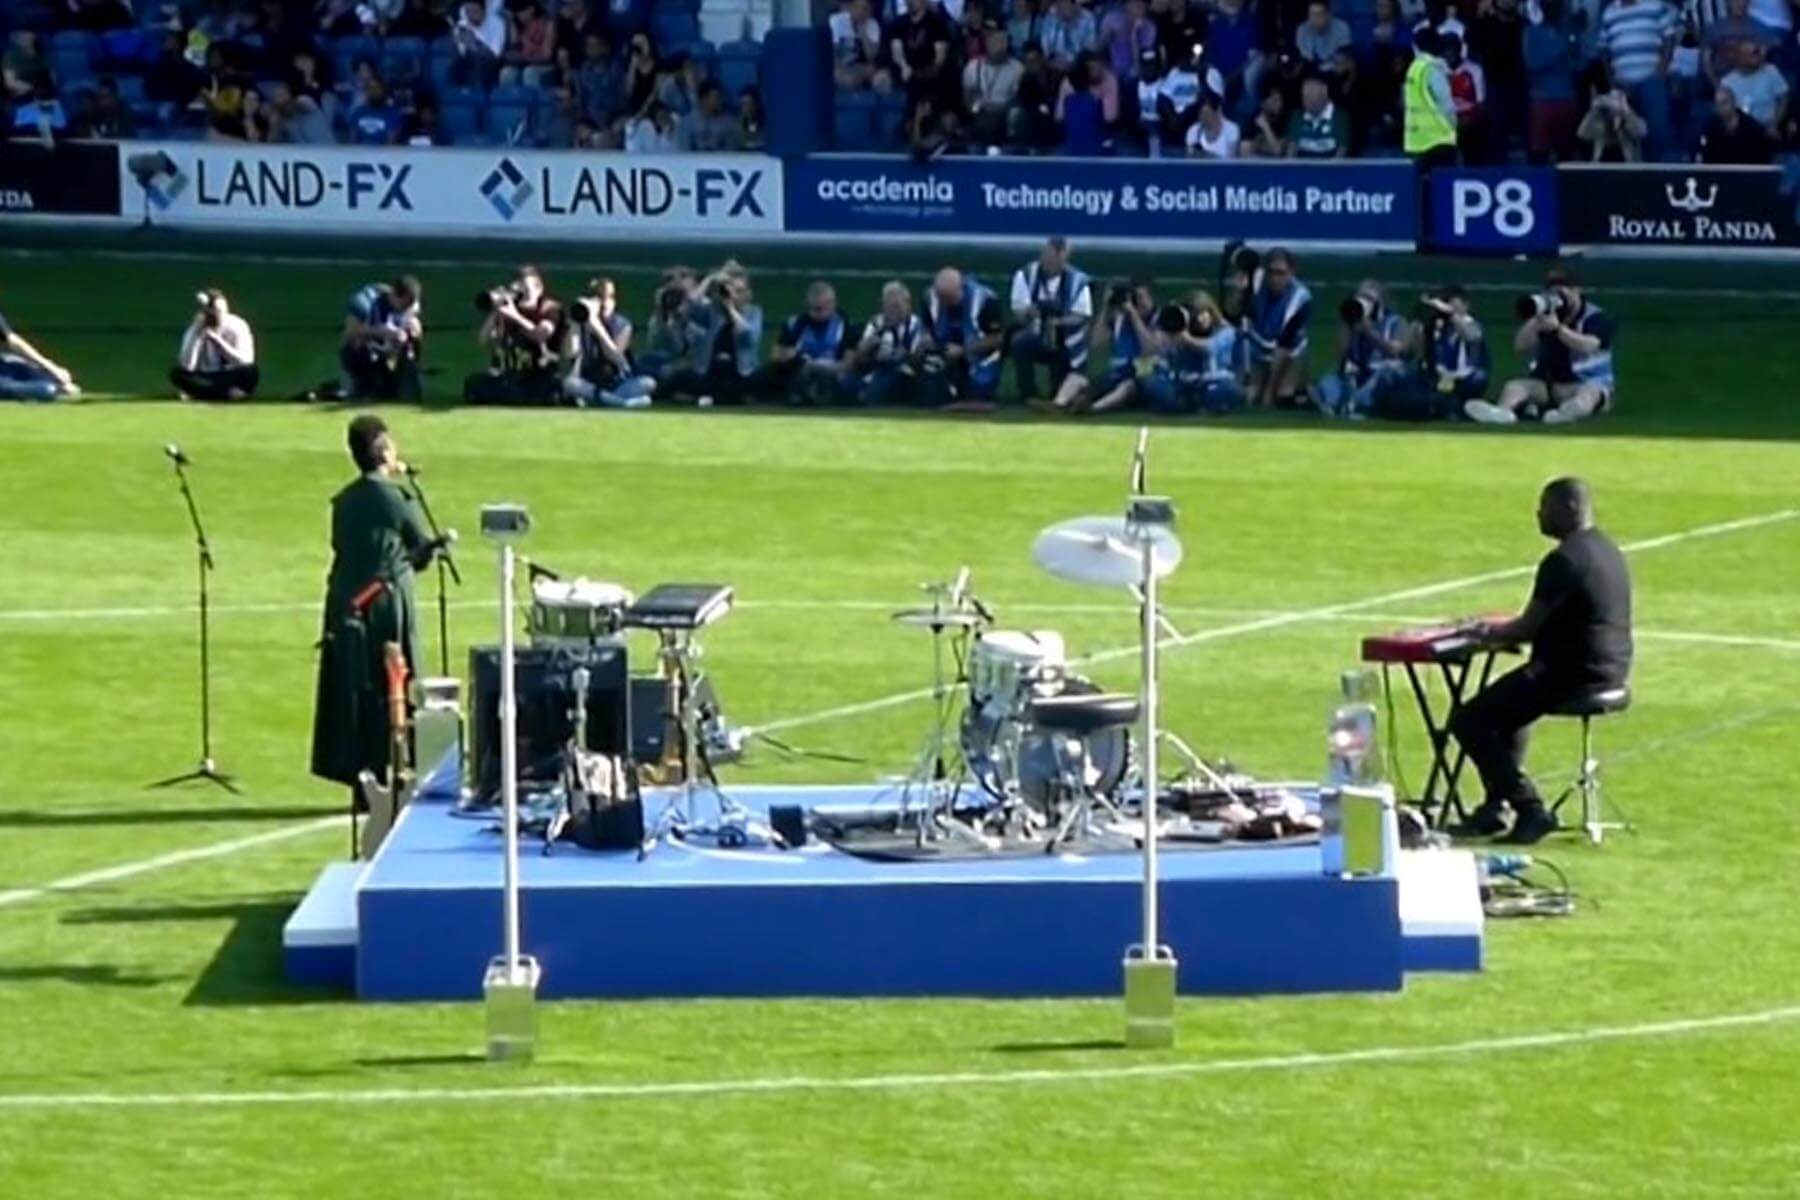 Bespoke Performance Stage Hire for Game4Grenfell at Loftus Road